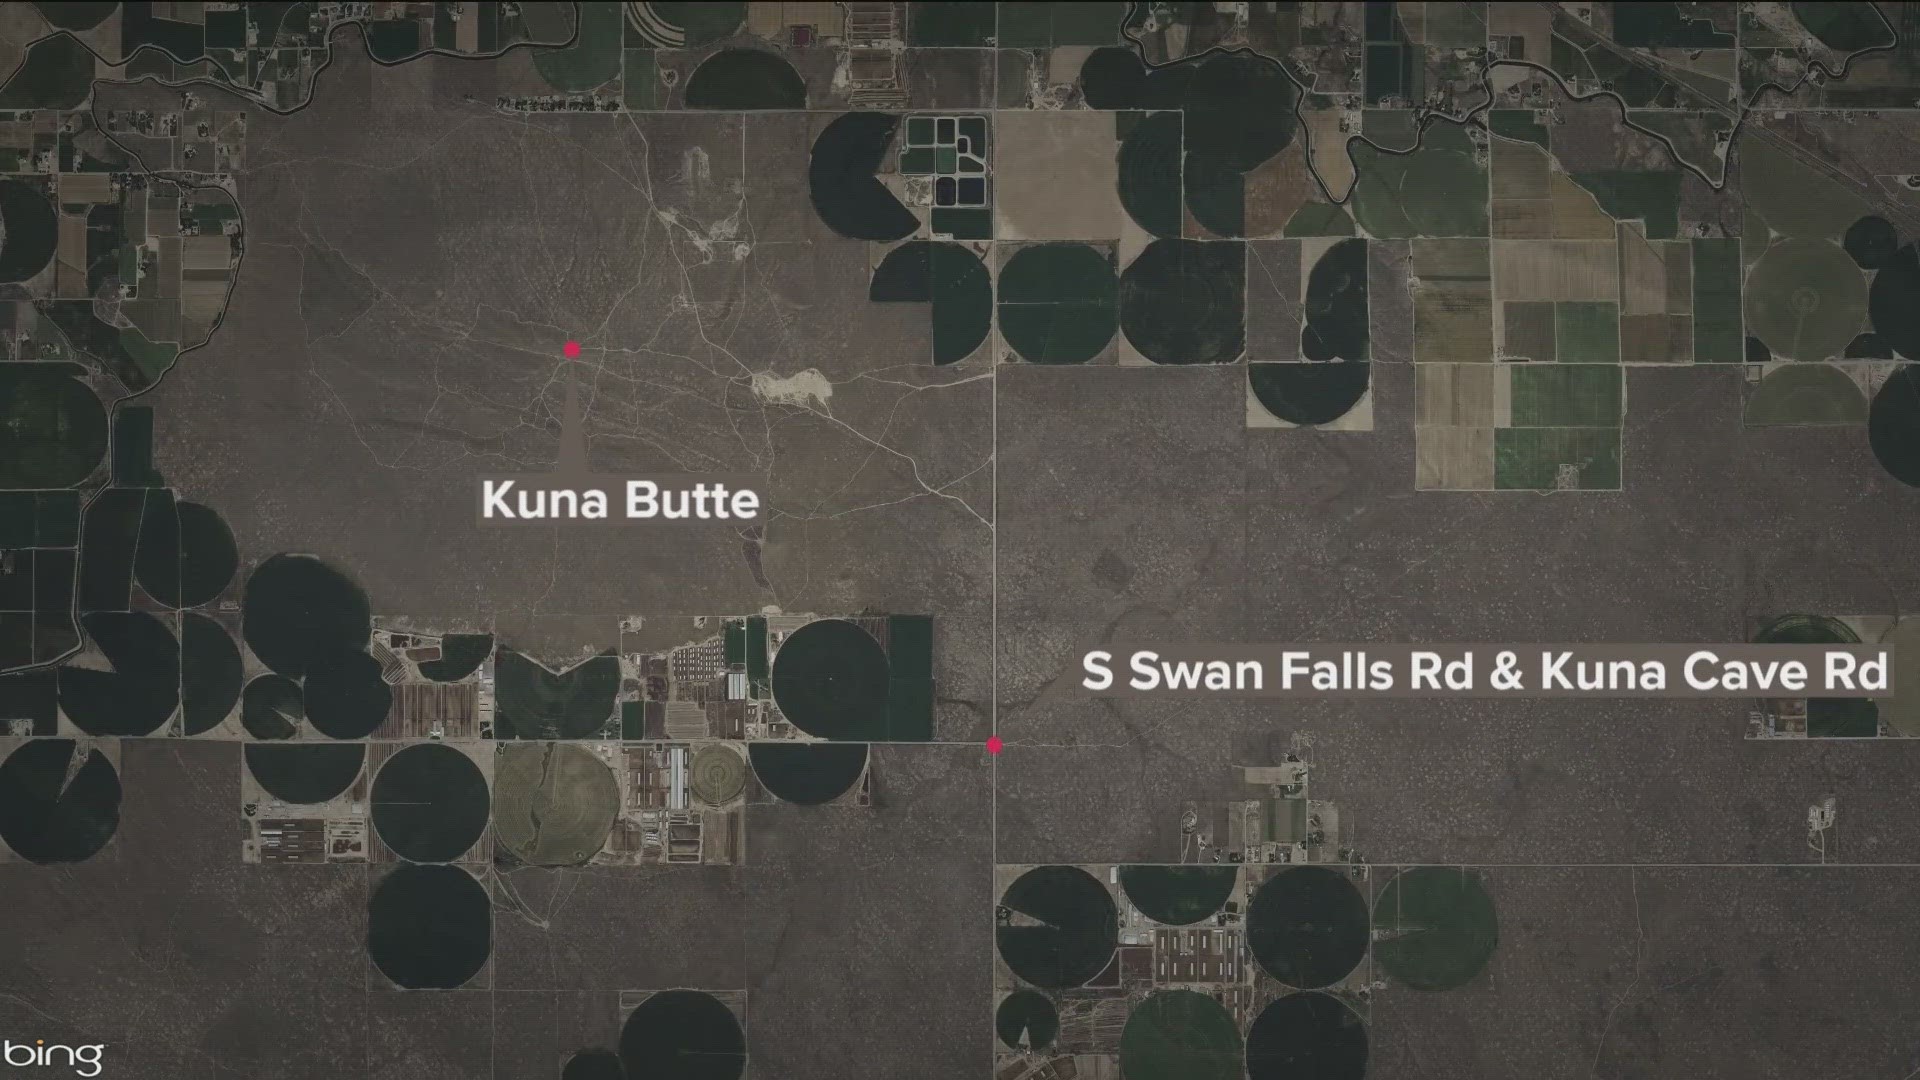 The Ada County Sheriff's Office said the fight happened at a bonfire late Friday night near Kuna Cave/Swan Falls.